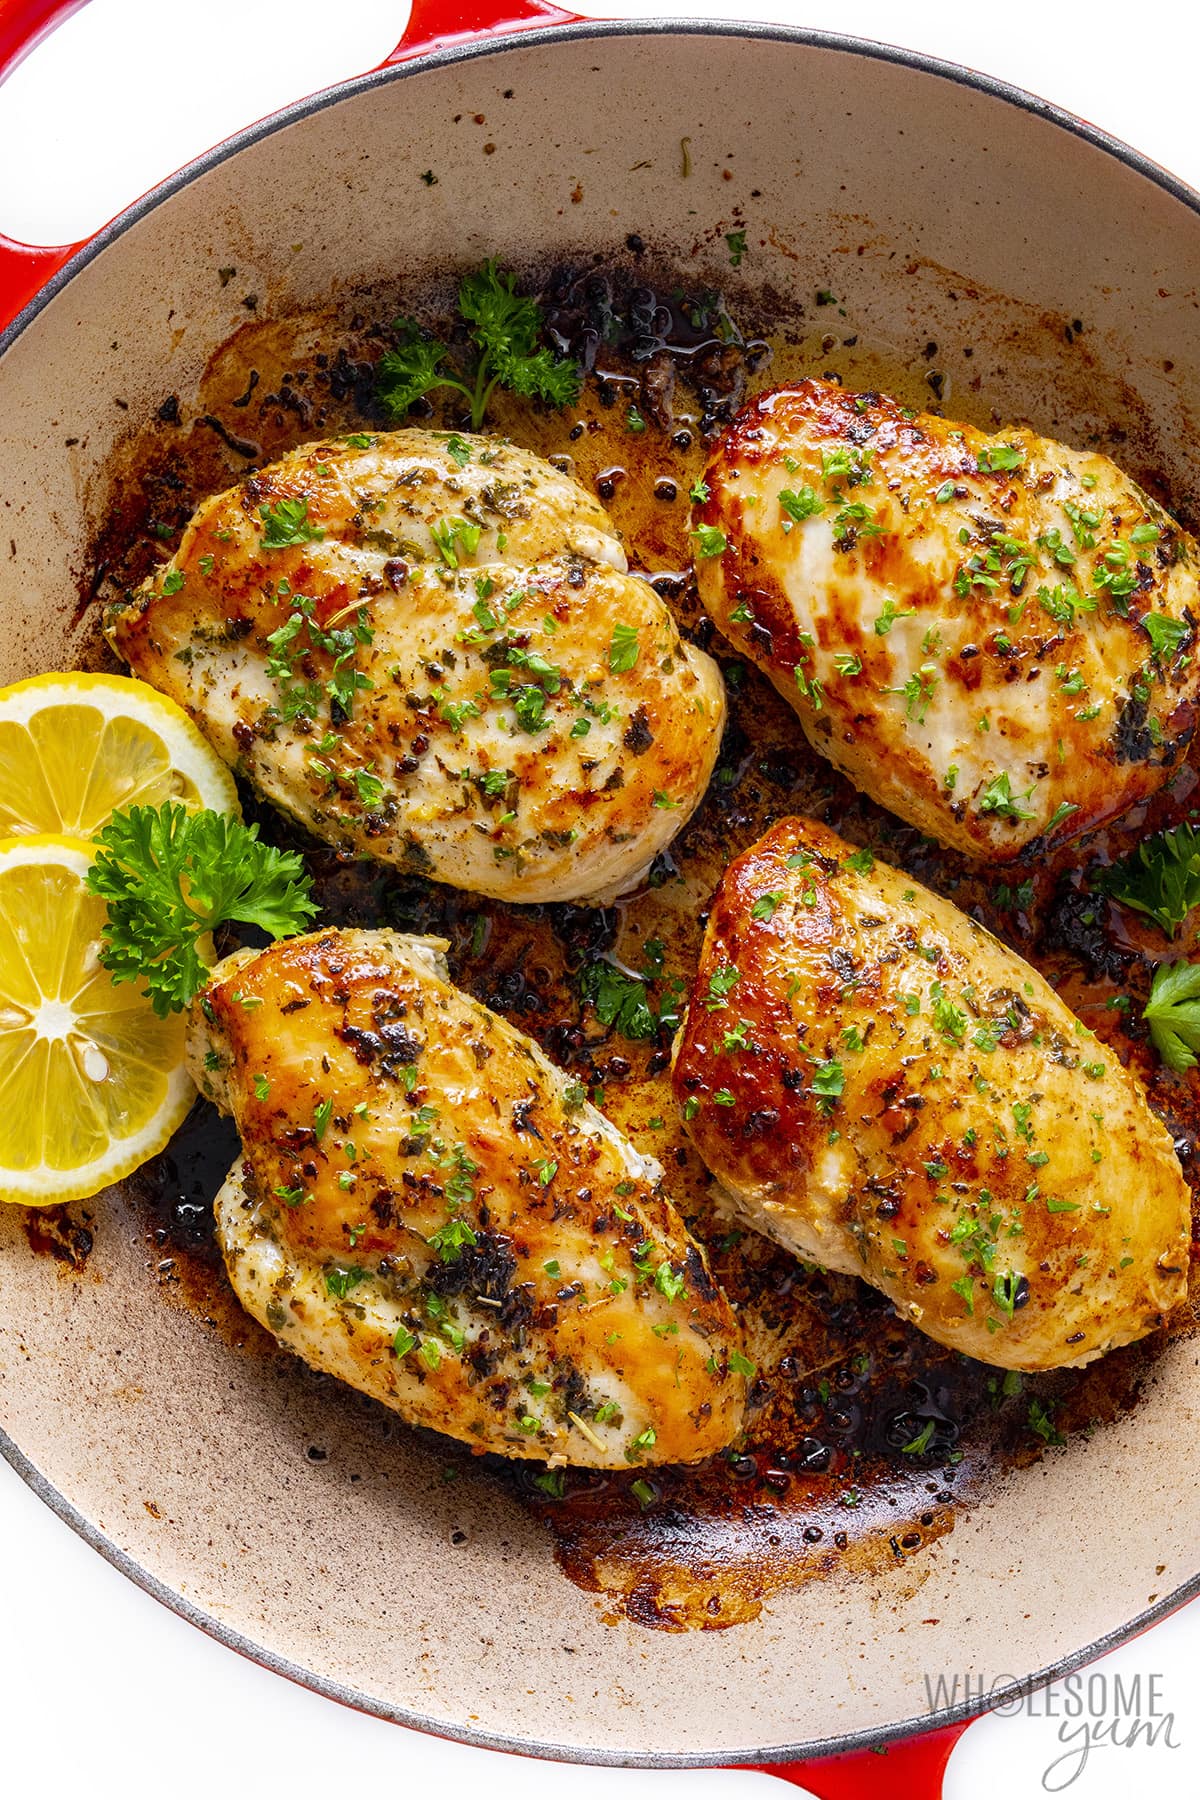 Lemon Garlic Chicken with Parsley and Lemon Slices.